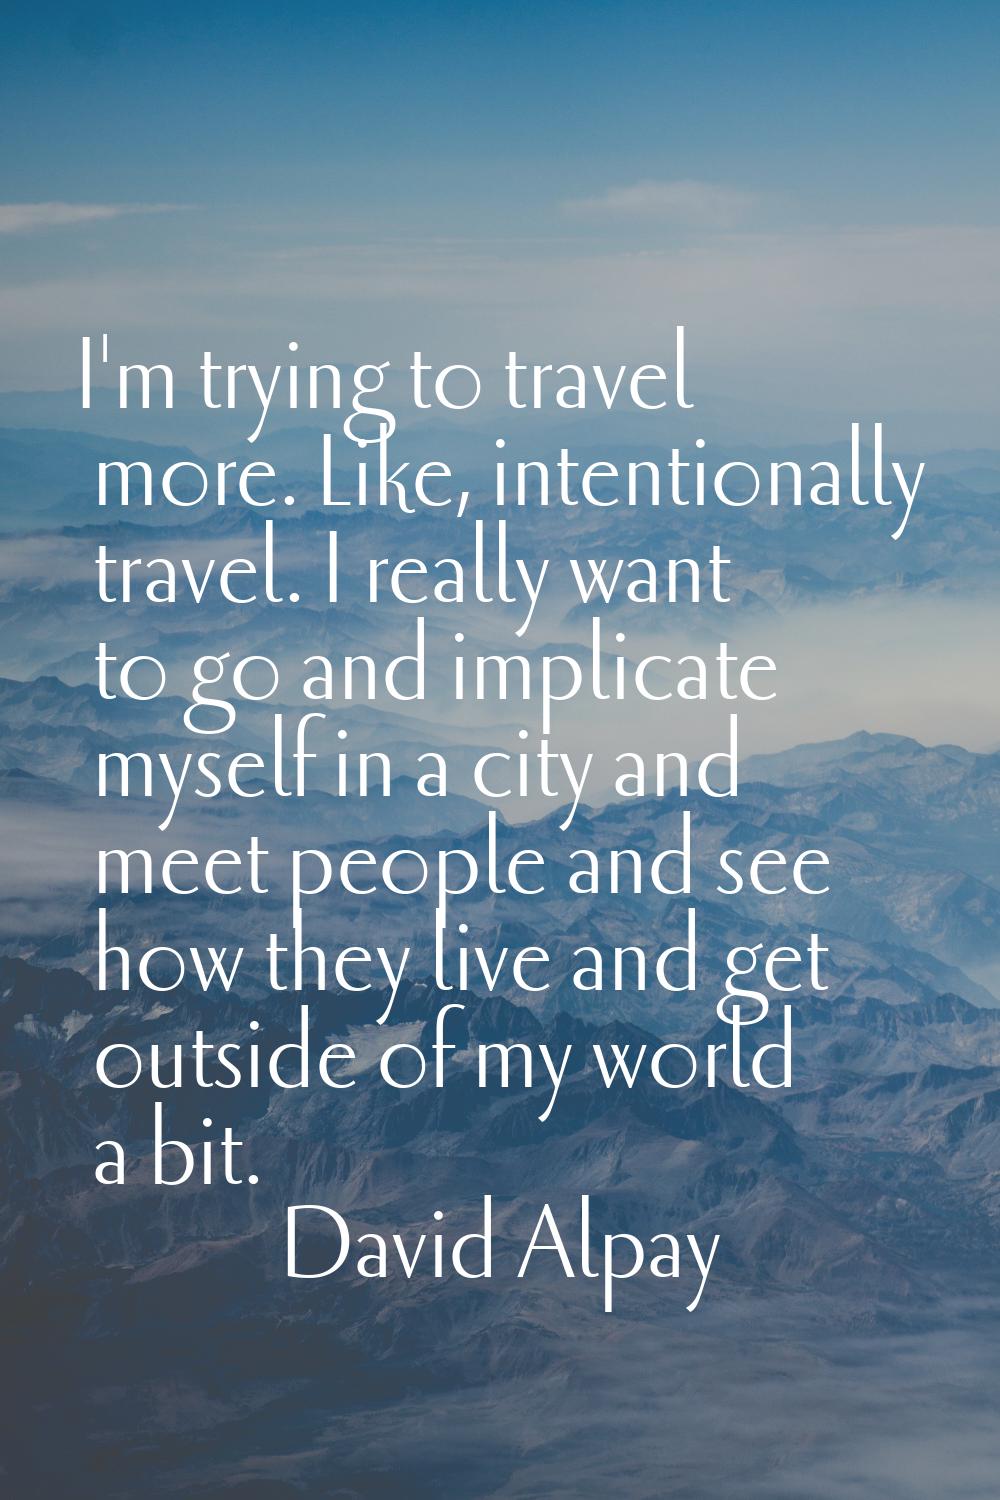 I'm trying to travel more. Like, intentionally travel. I really want to go and implicate myself in 